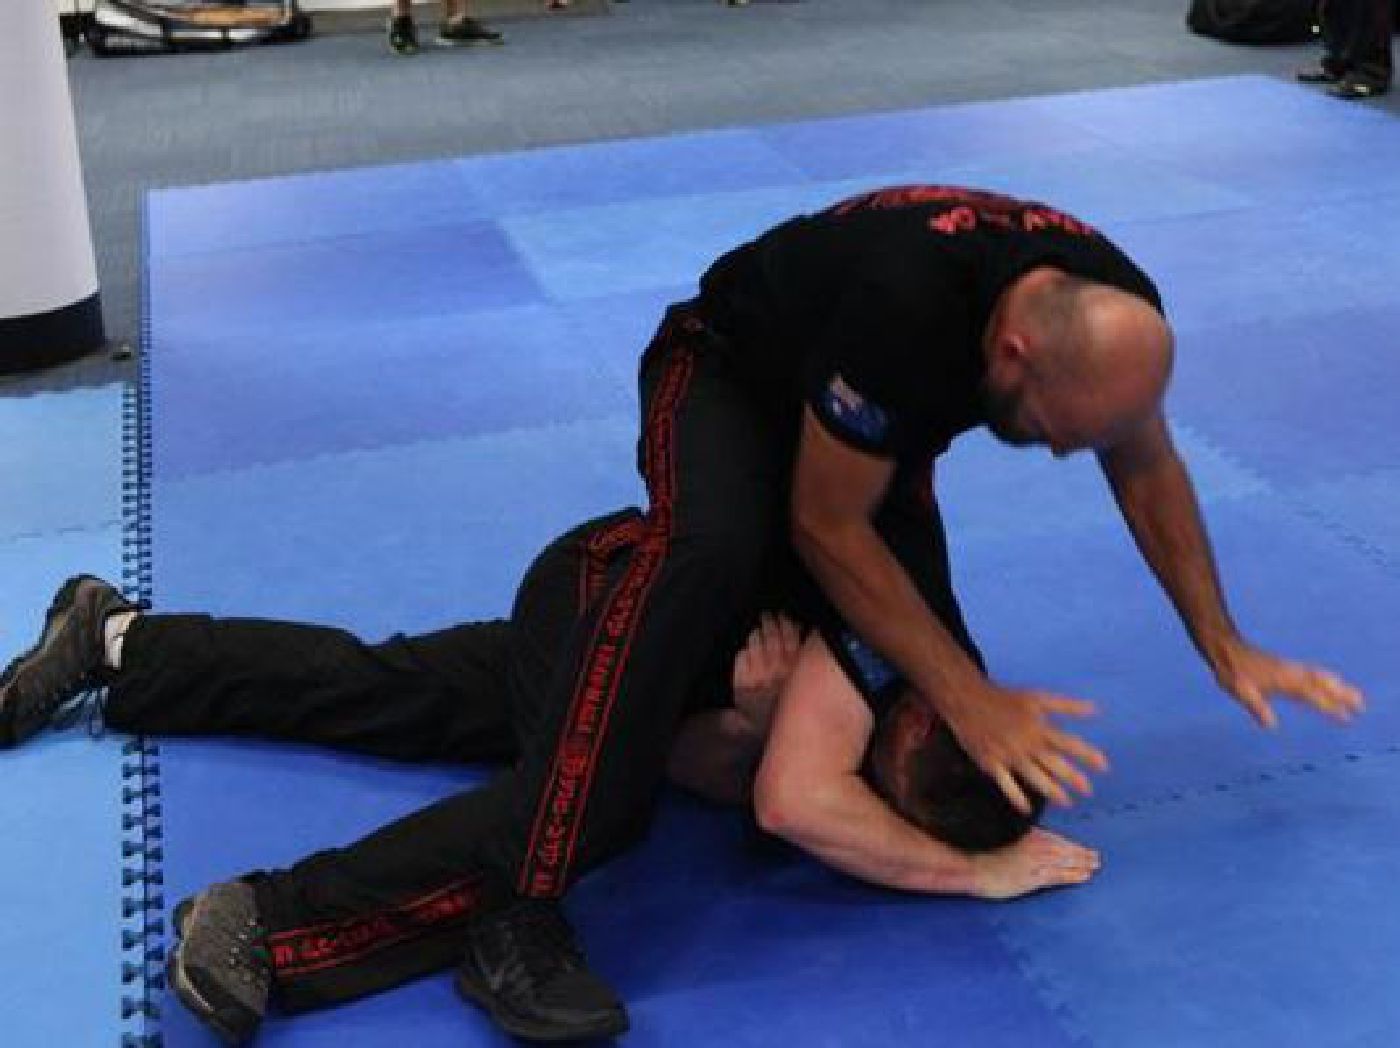 Krav Maga practitioners practicing ground defense and escape drills